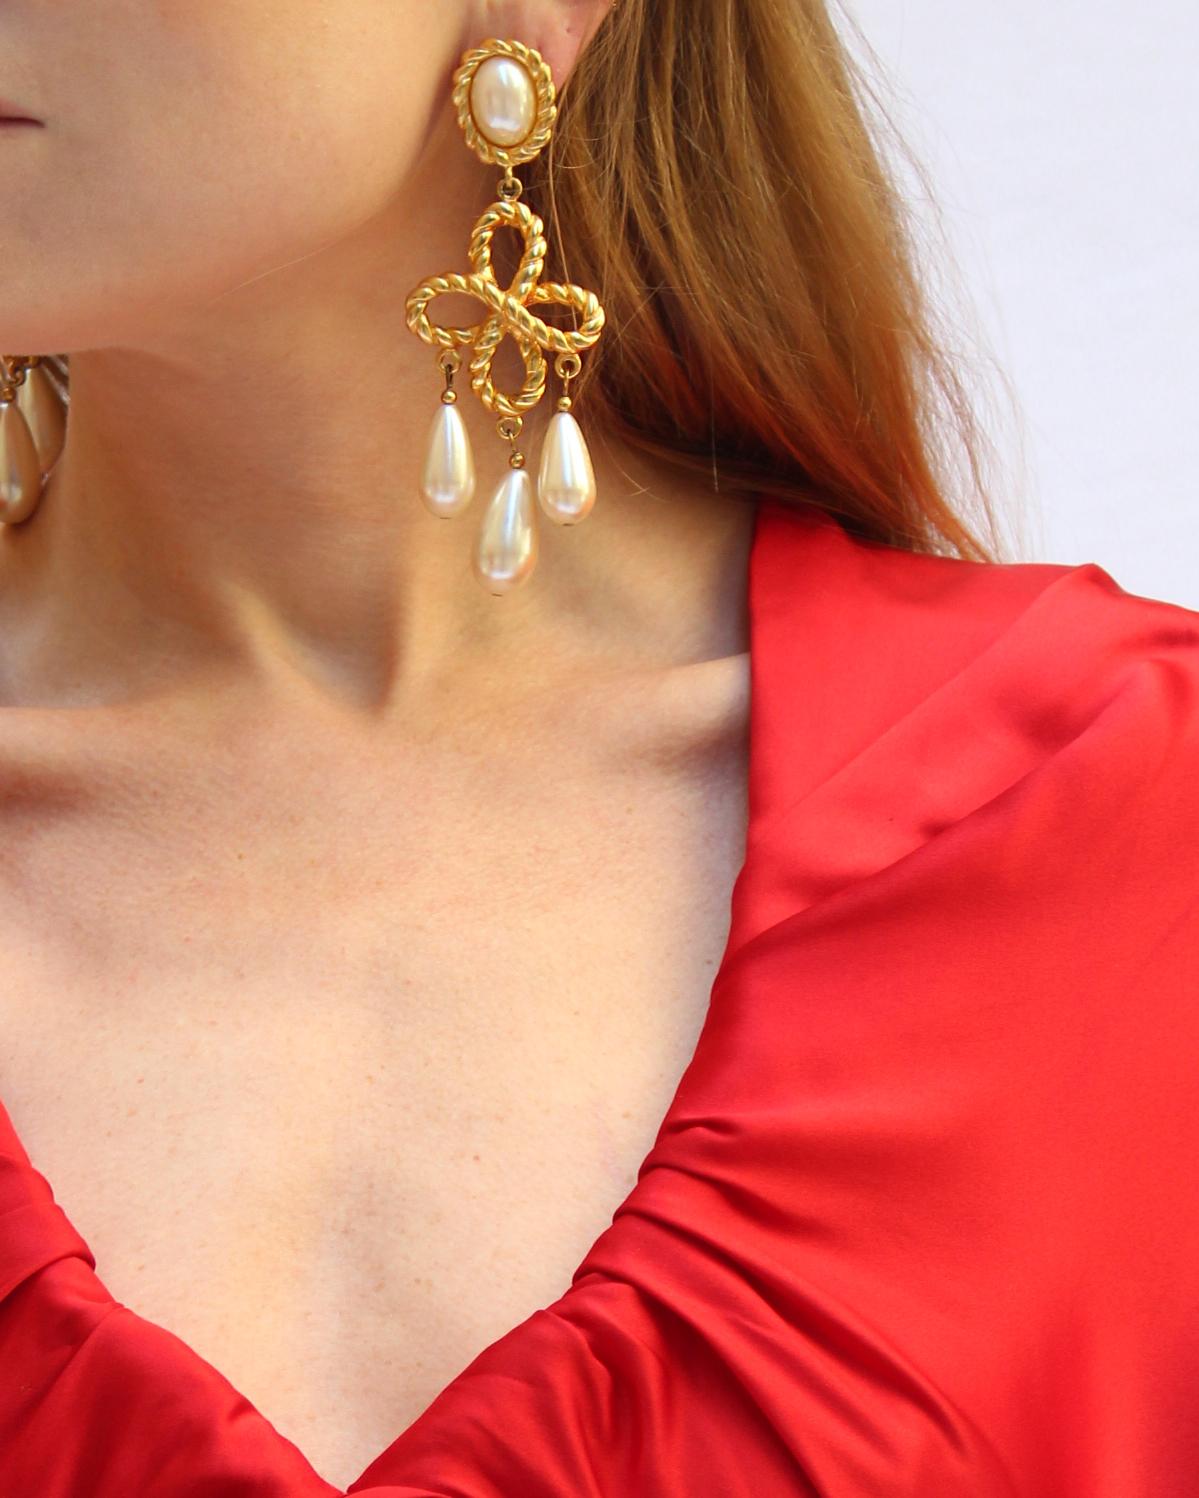 These awe-inspiring vintage Les Bernard statement earrings are truly some of the best vintage earrings I've ever seen, in years of collecting. They feature a swirling rope motif in matte gold, with three teardrop pearls suspended, creating graceful